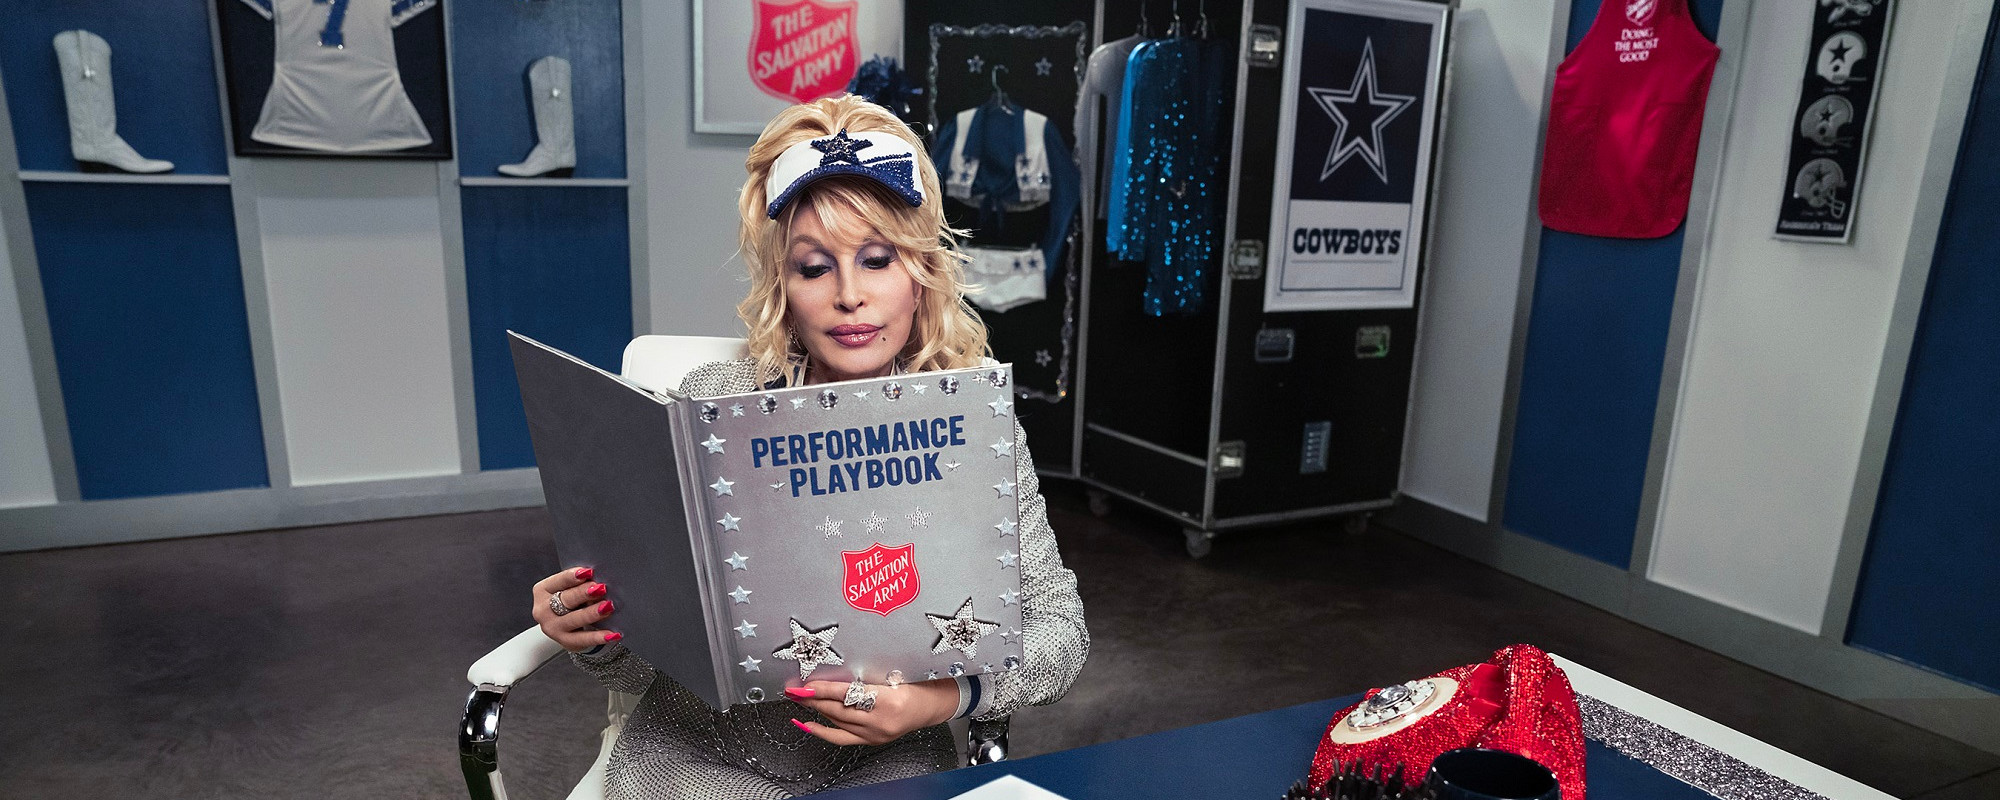 Dolly Parton to Perform at Dallas Cowboys’ Thanksgiving Day Game as Part of Salvation Army Charity Campaign